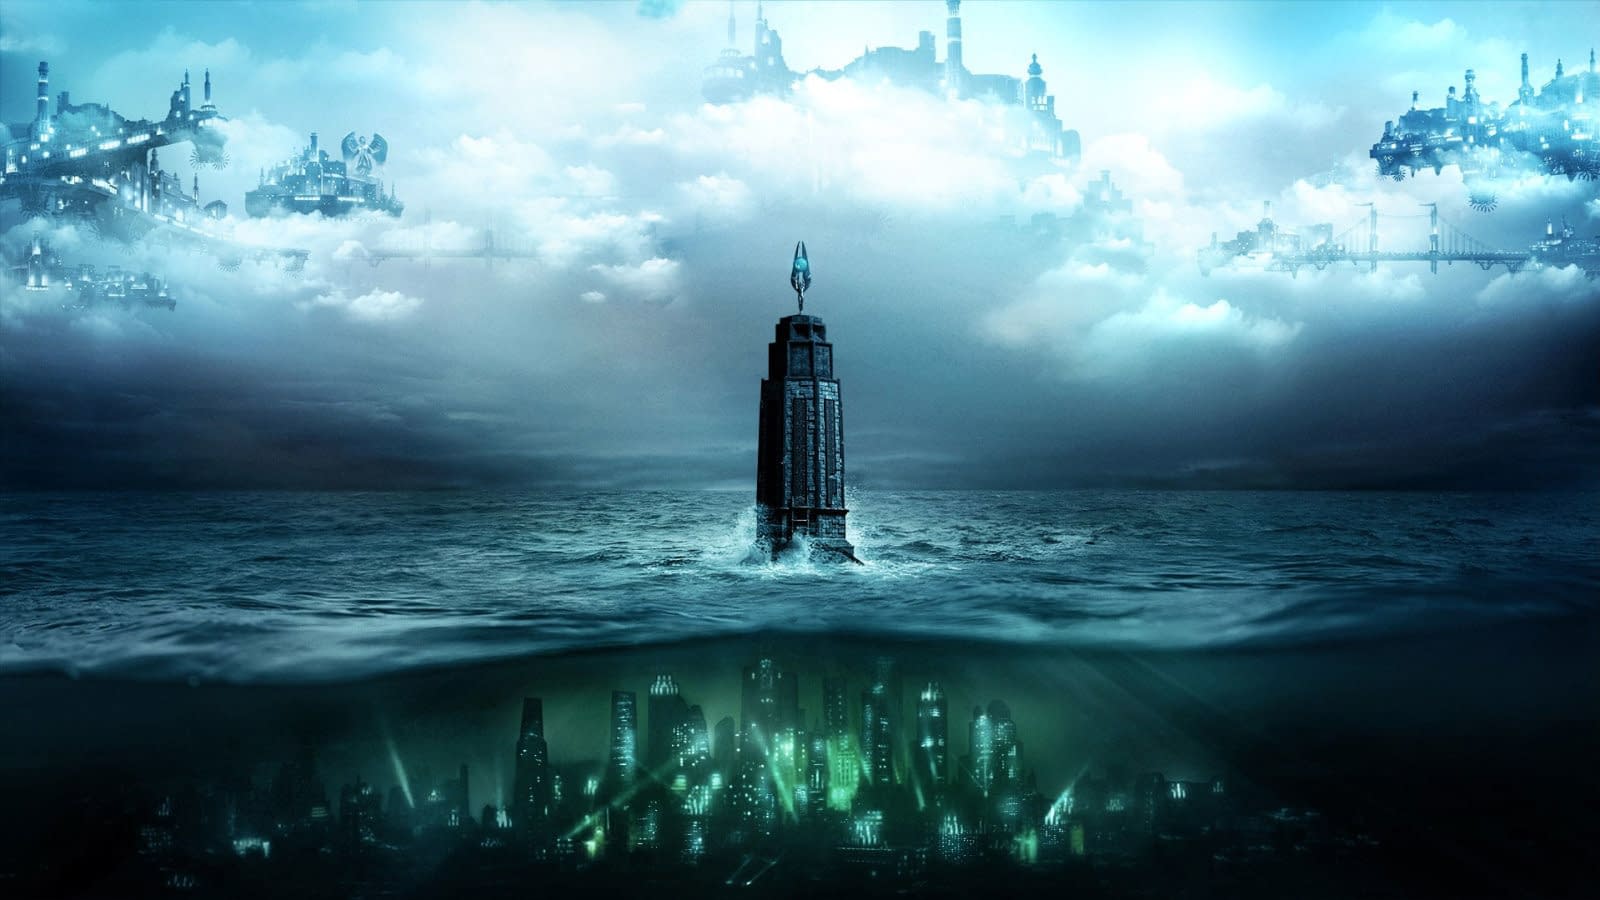 It's About Time We Recieved That "BioShock" Movie